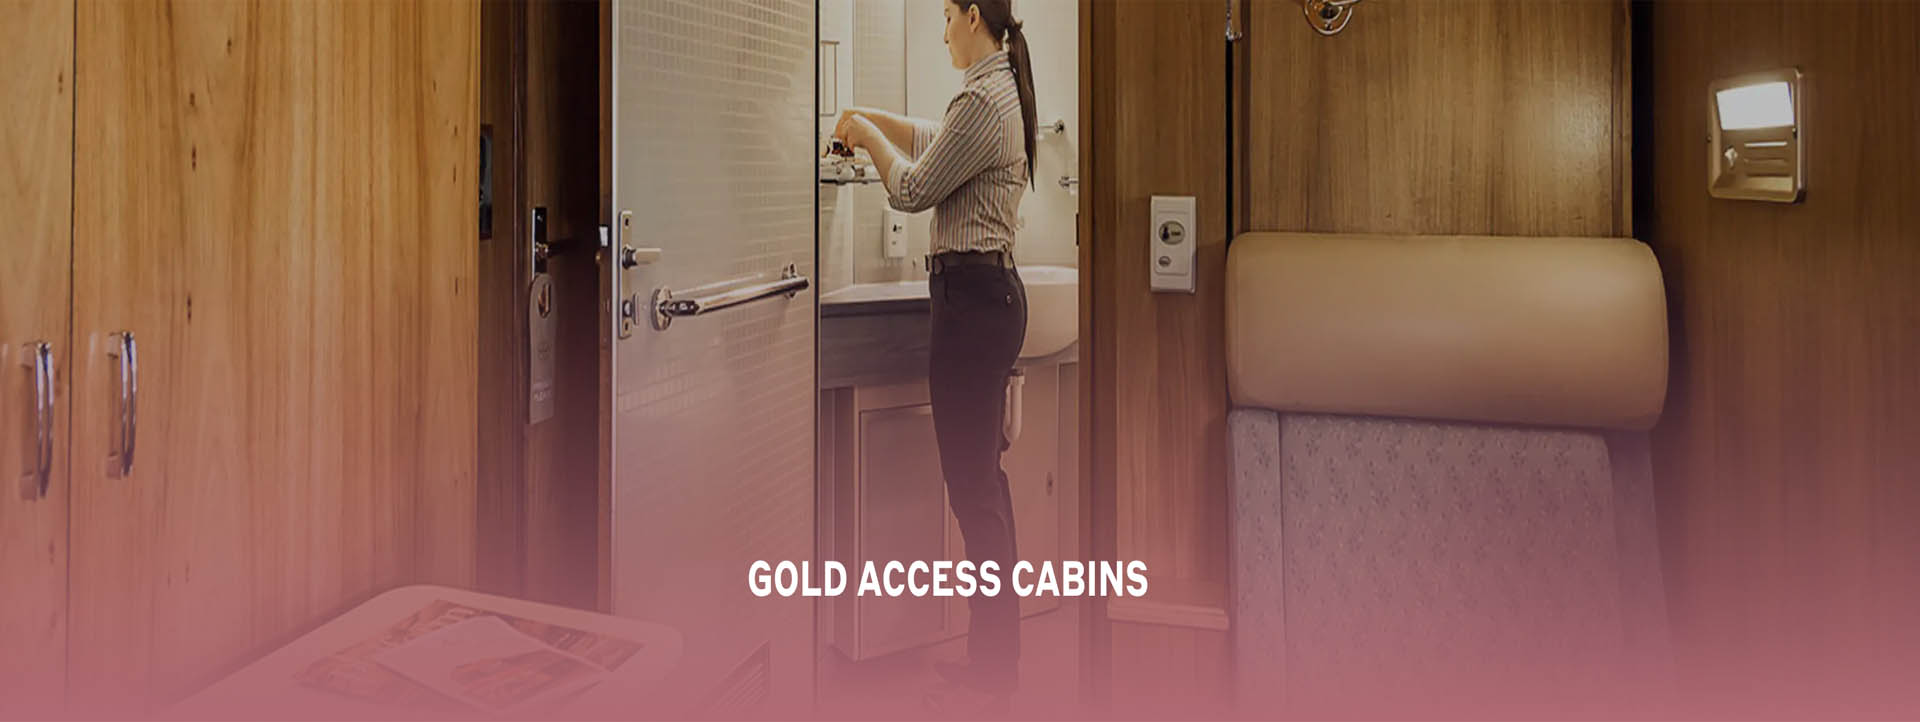 GHAN GOLD ACCESS CABIN SERVICES slider